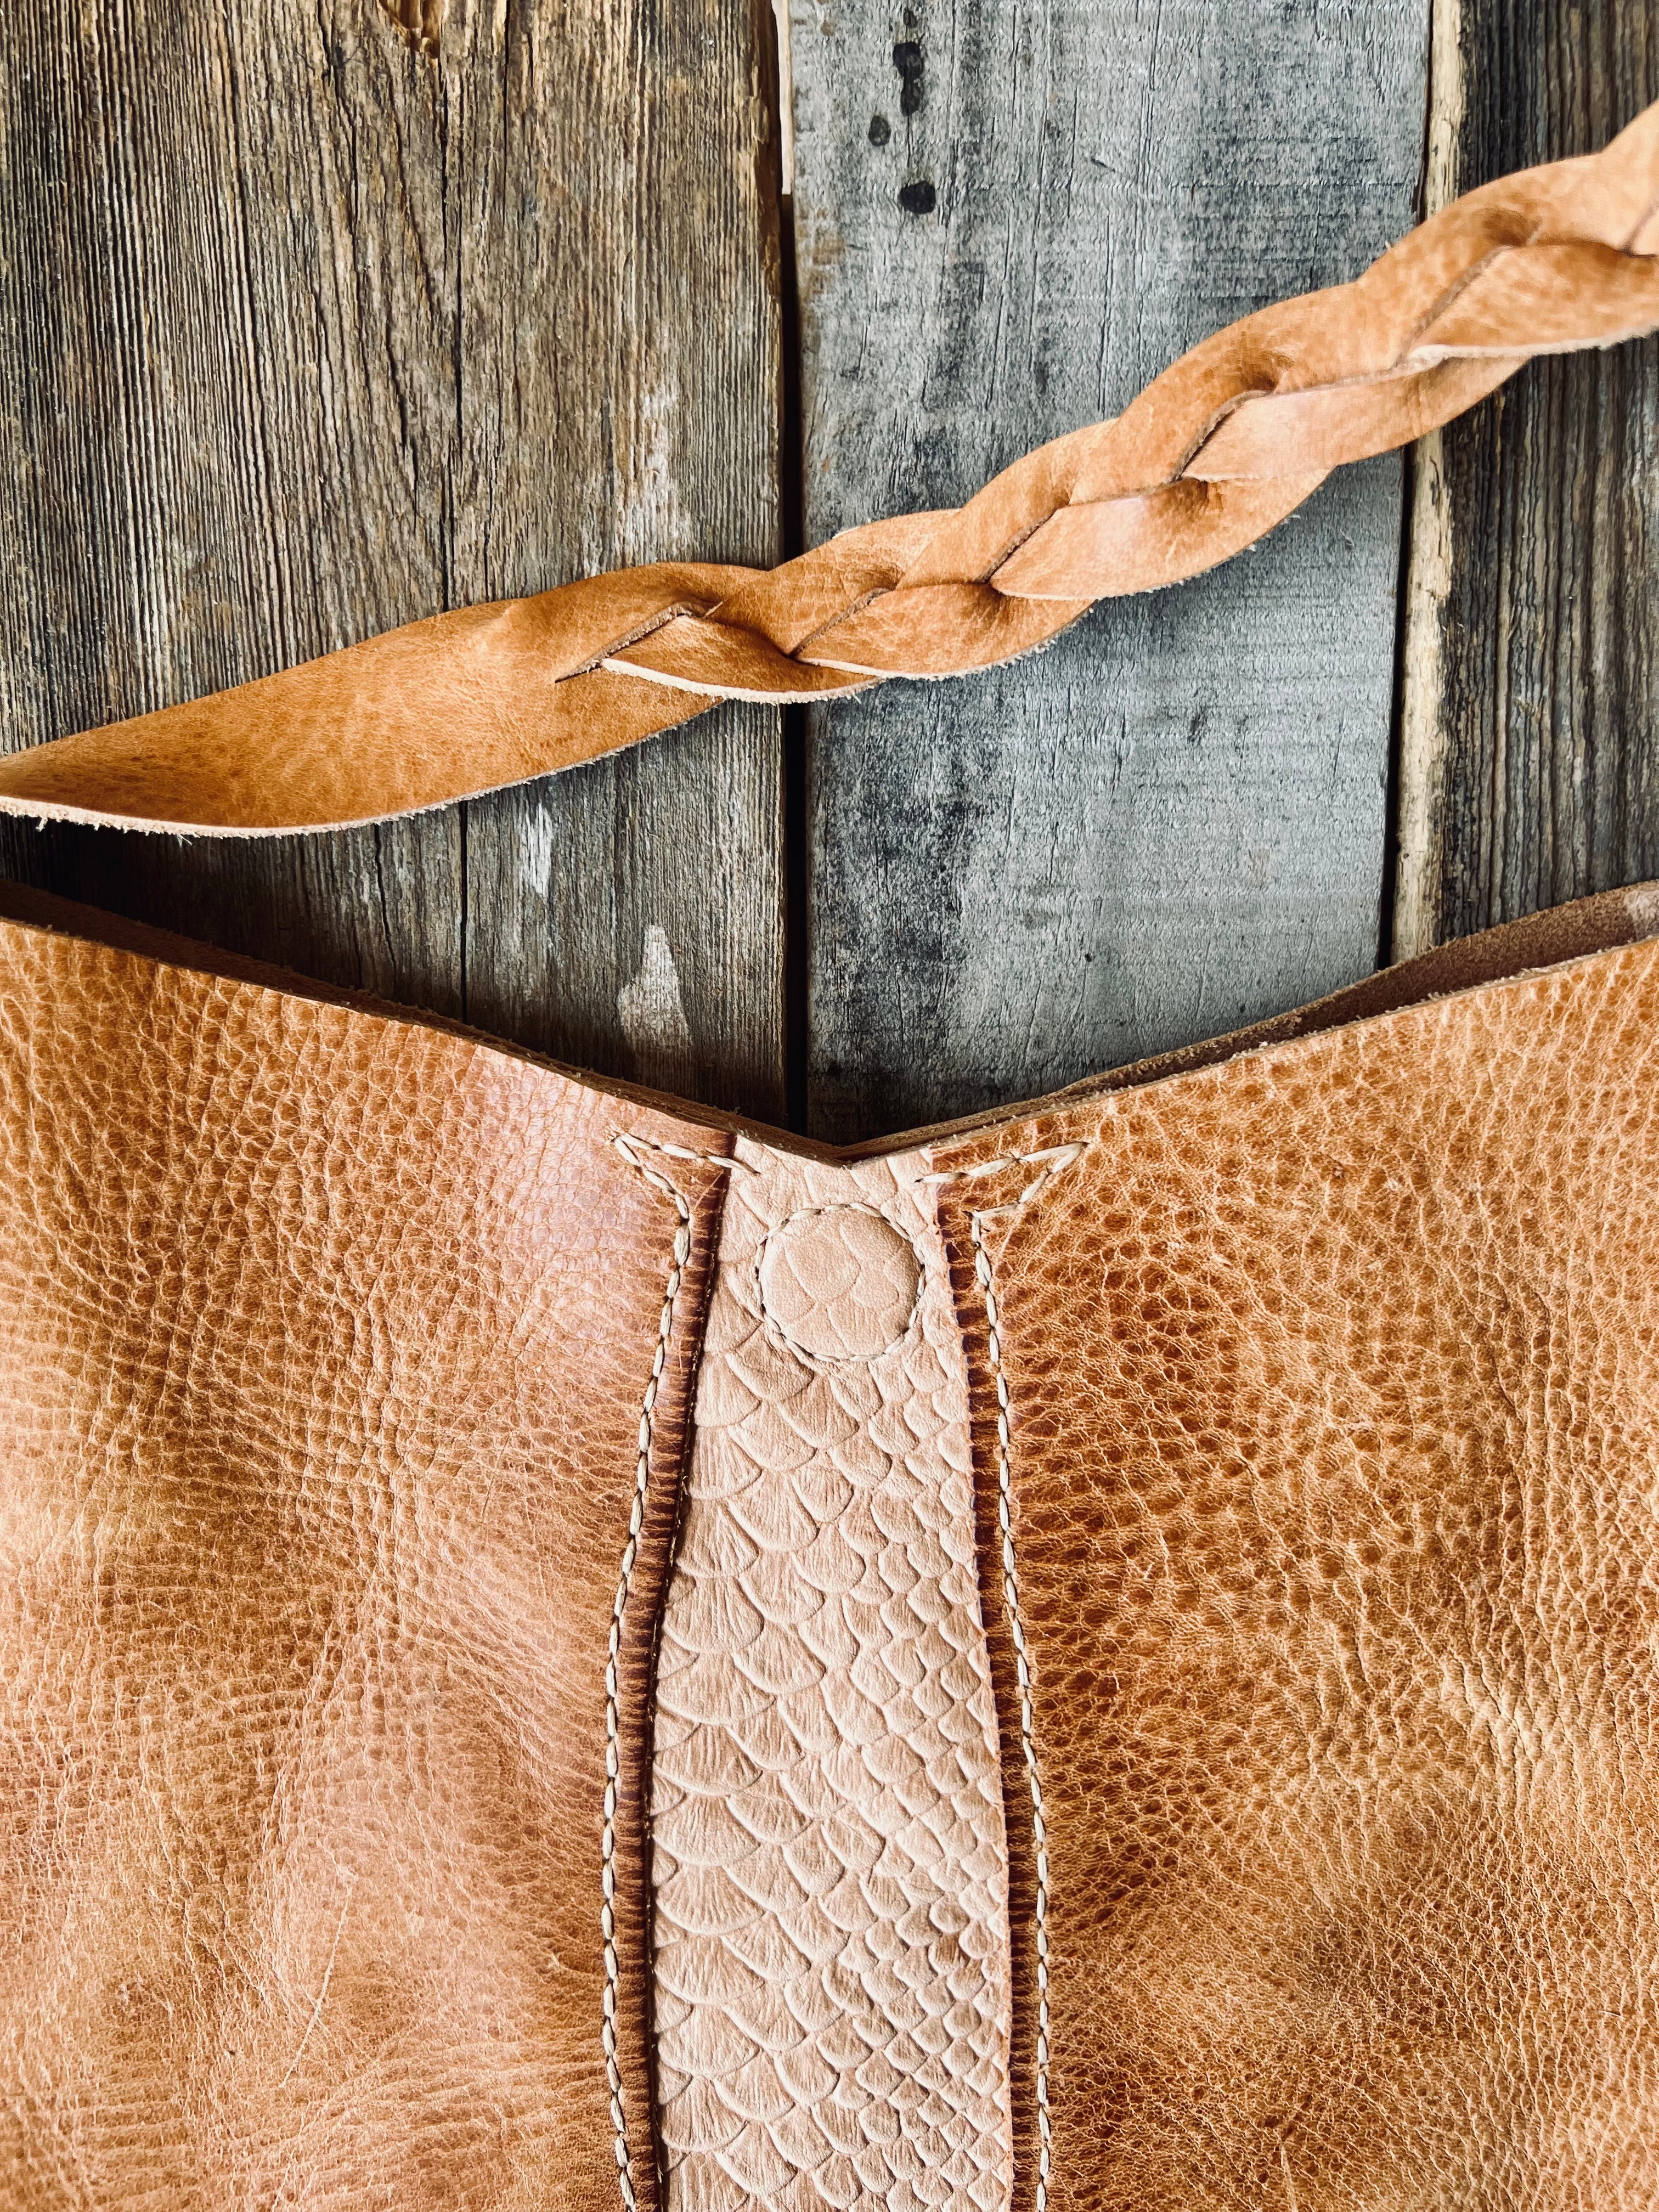 How to soften leather - 5 methods to remove the stiffness of your leather